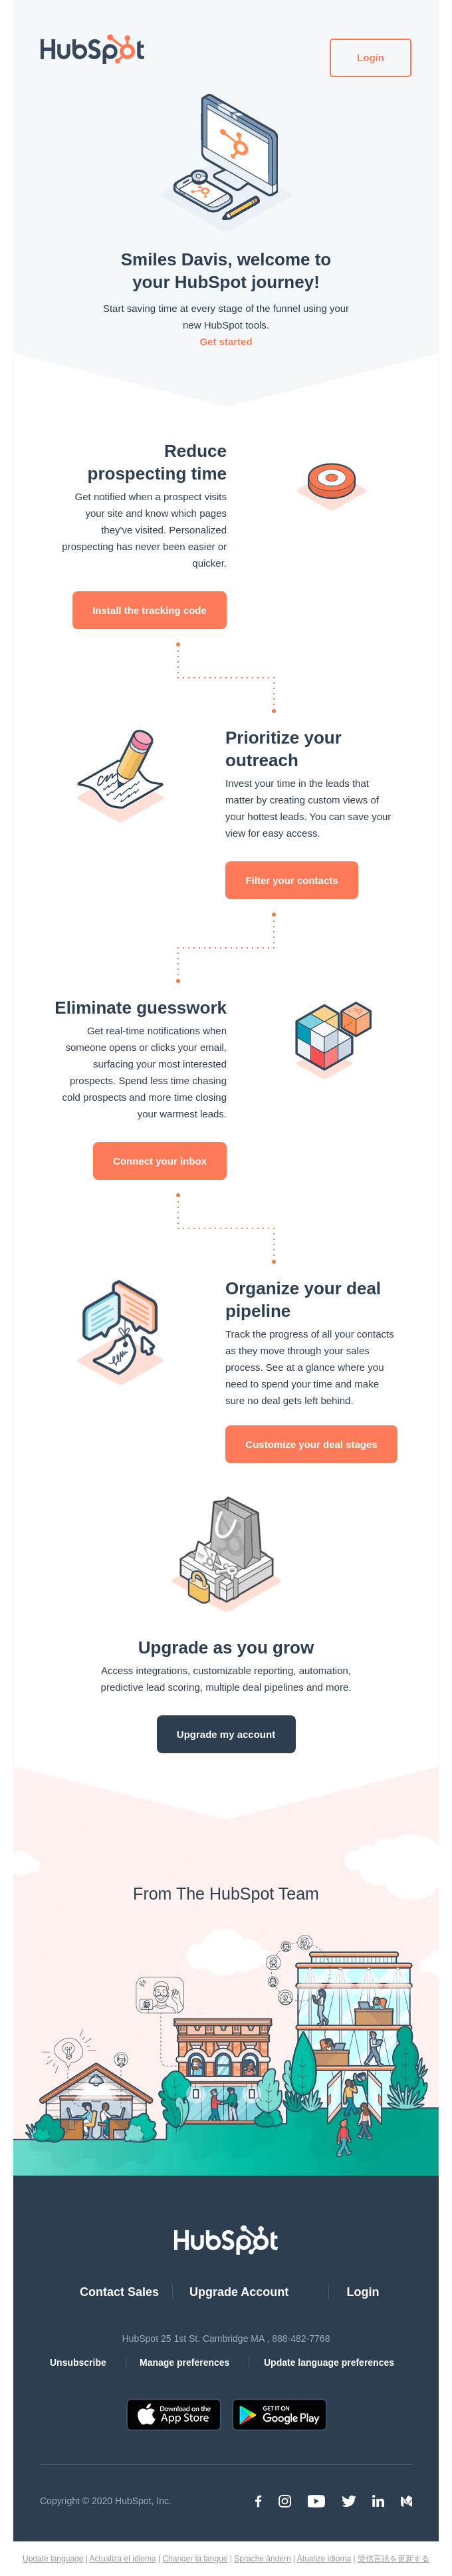 Welcome to your HubSpot journey - Hubspot Email Newsletter